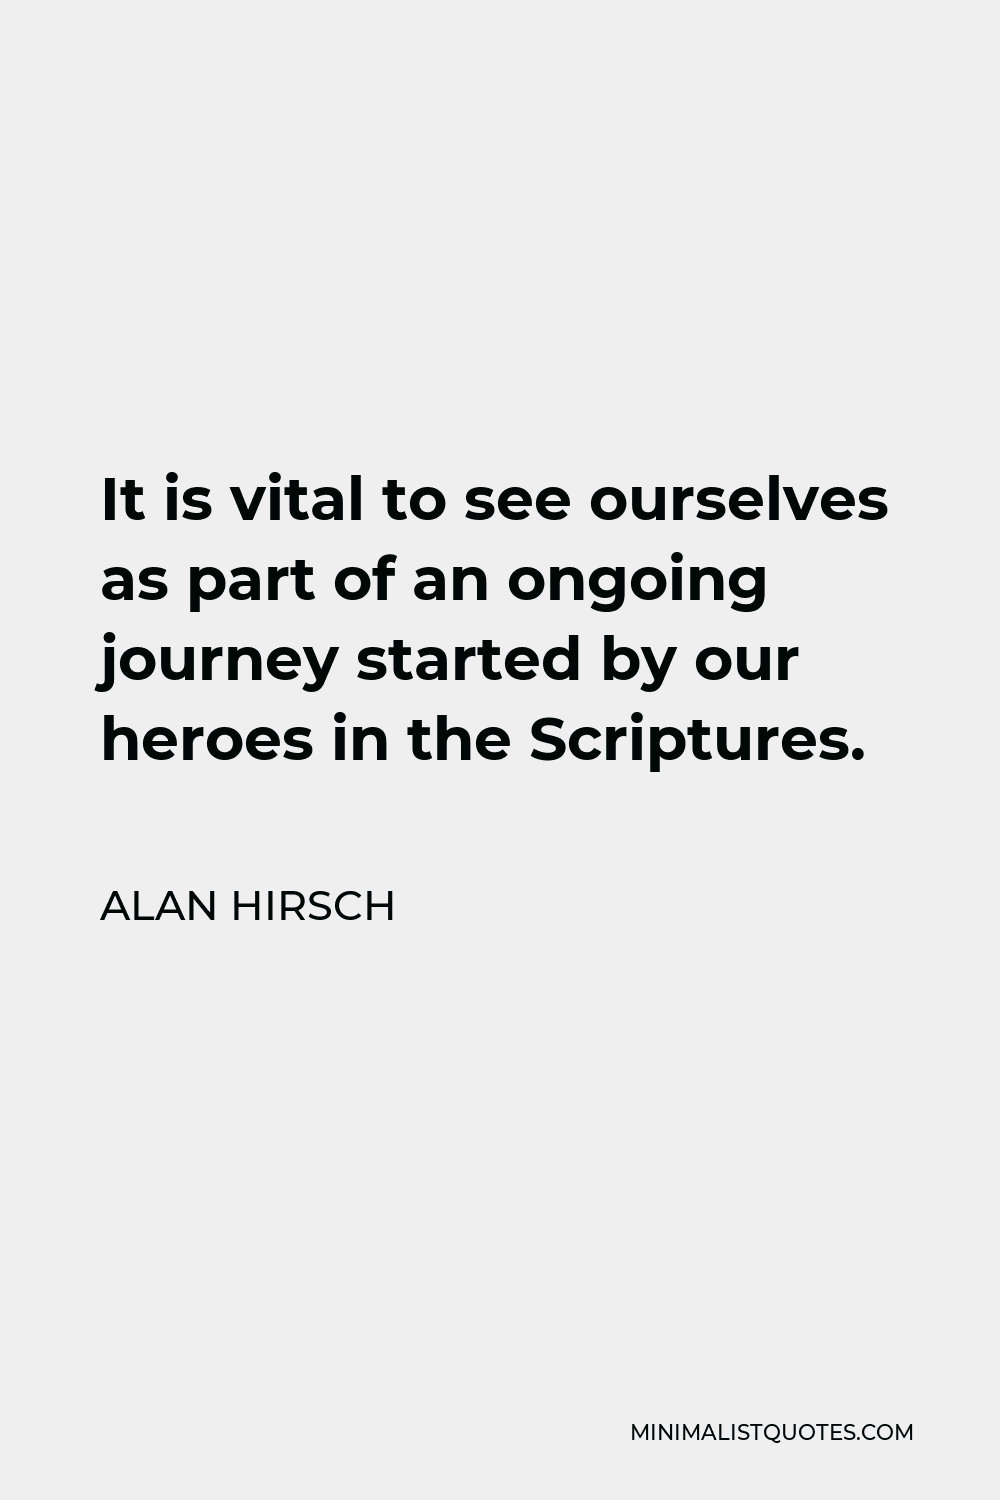 Alan Hirsch Quote - It is vital to see ourselves as part of an ongoing journey started by our heroes in the Scriptures.